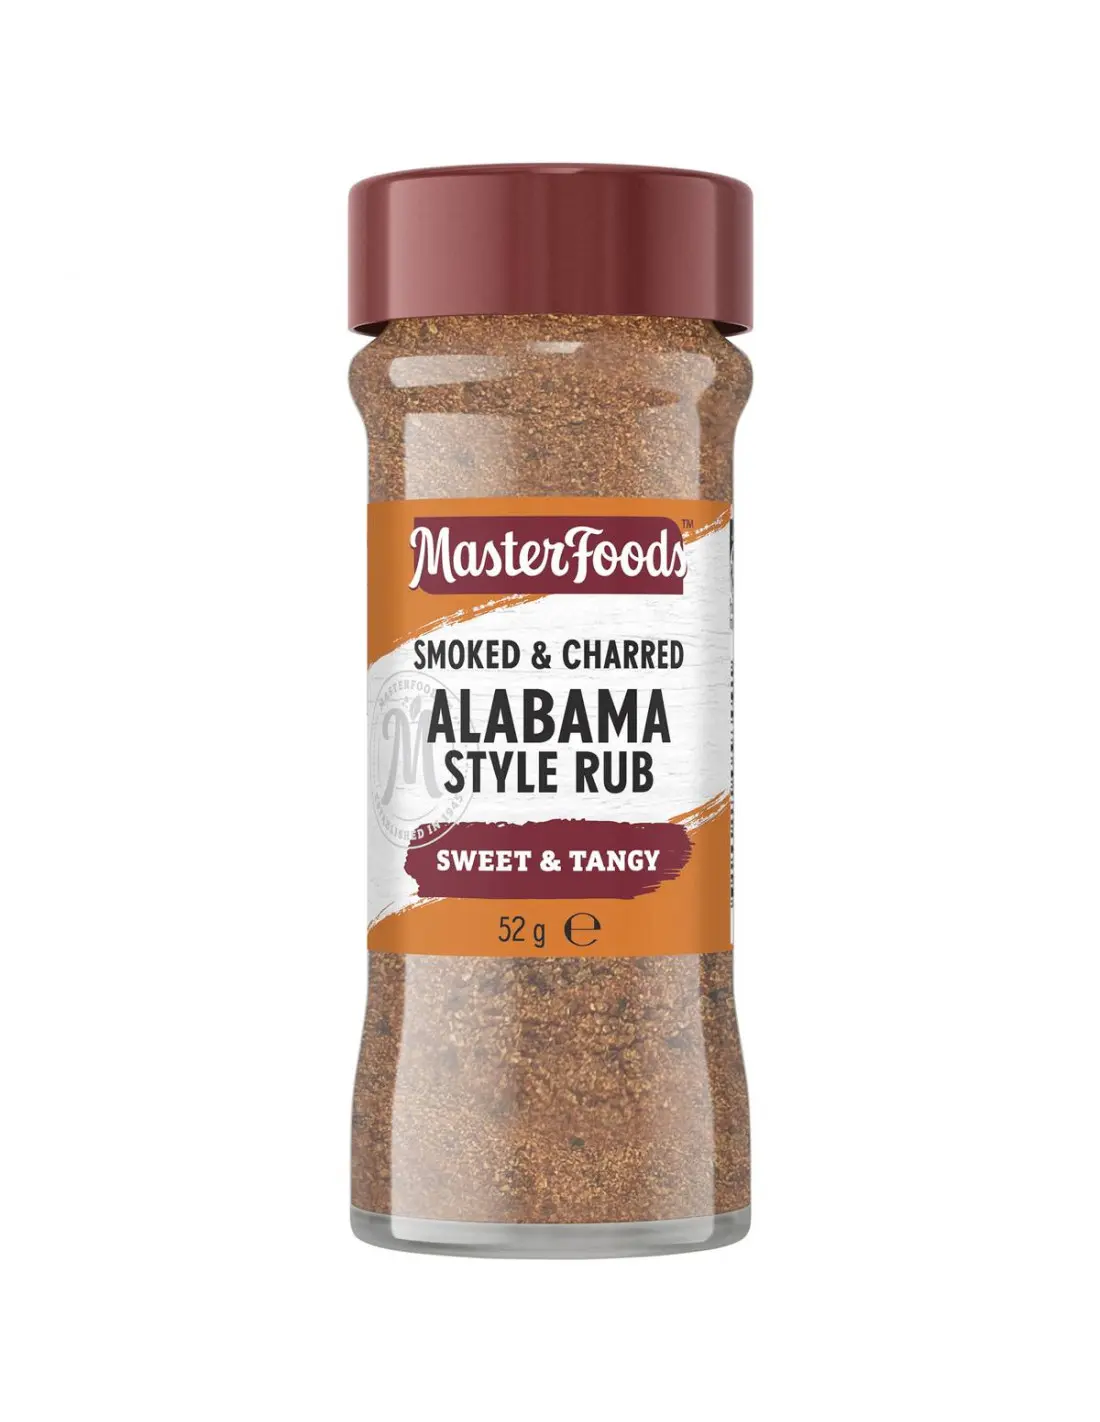 smoked and charred alabama style rub - What is smoked and charred Alabama rub